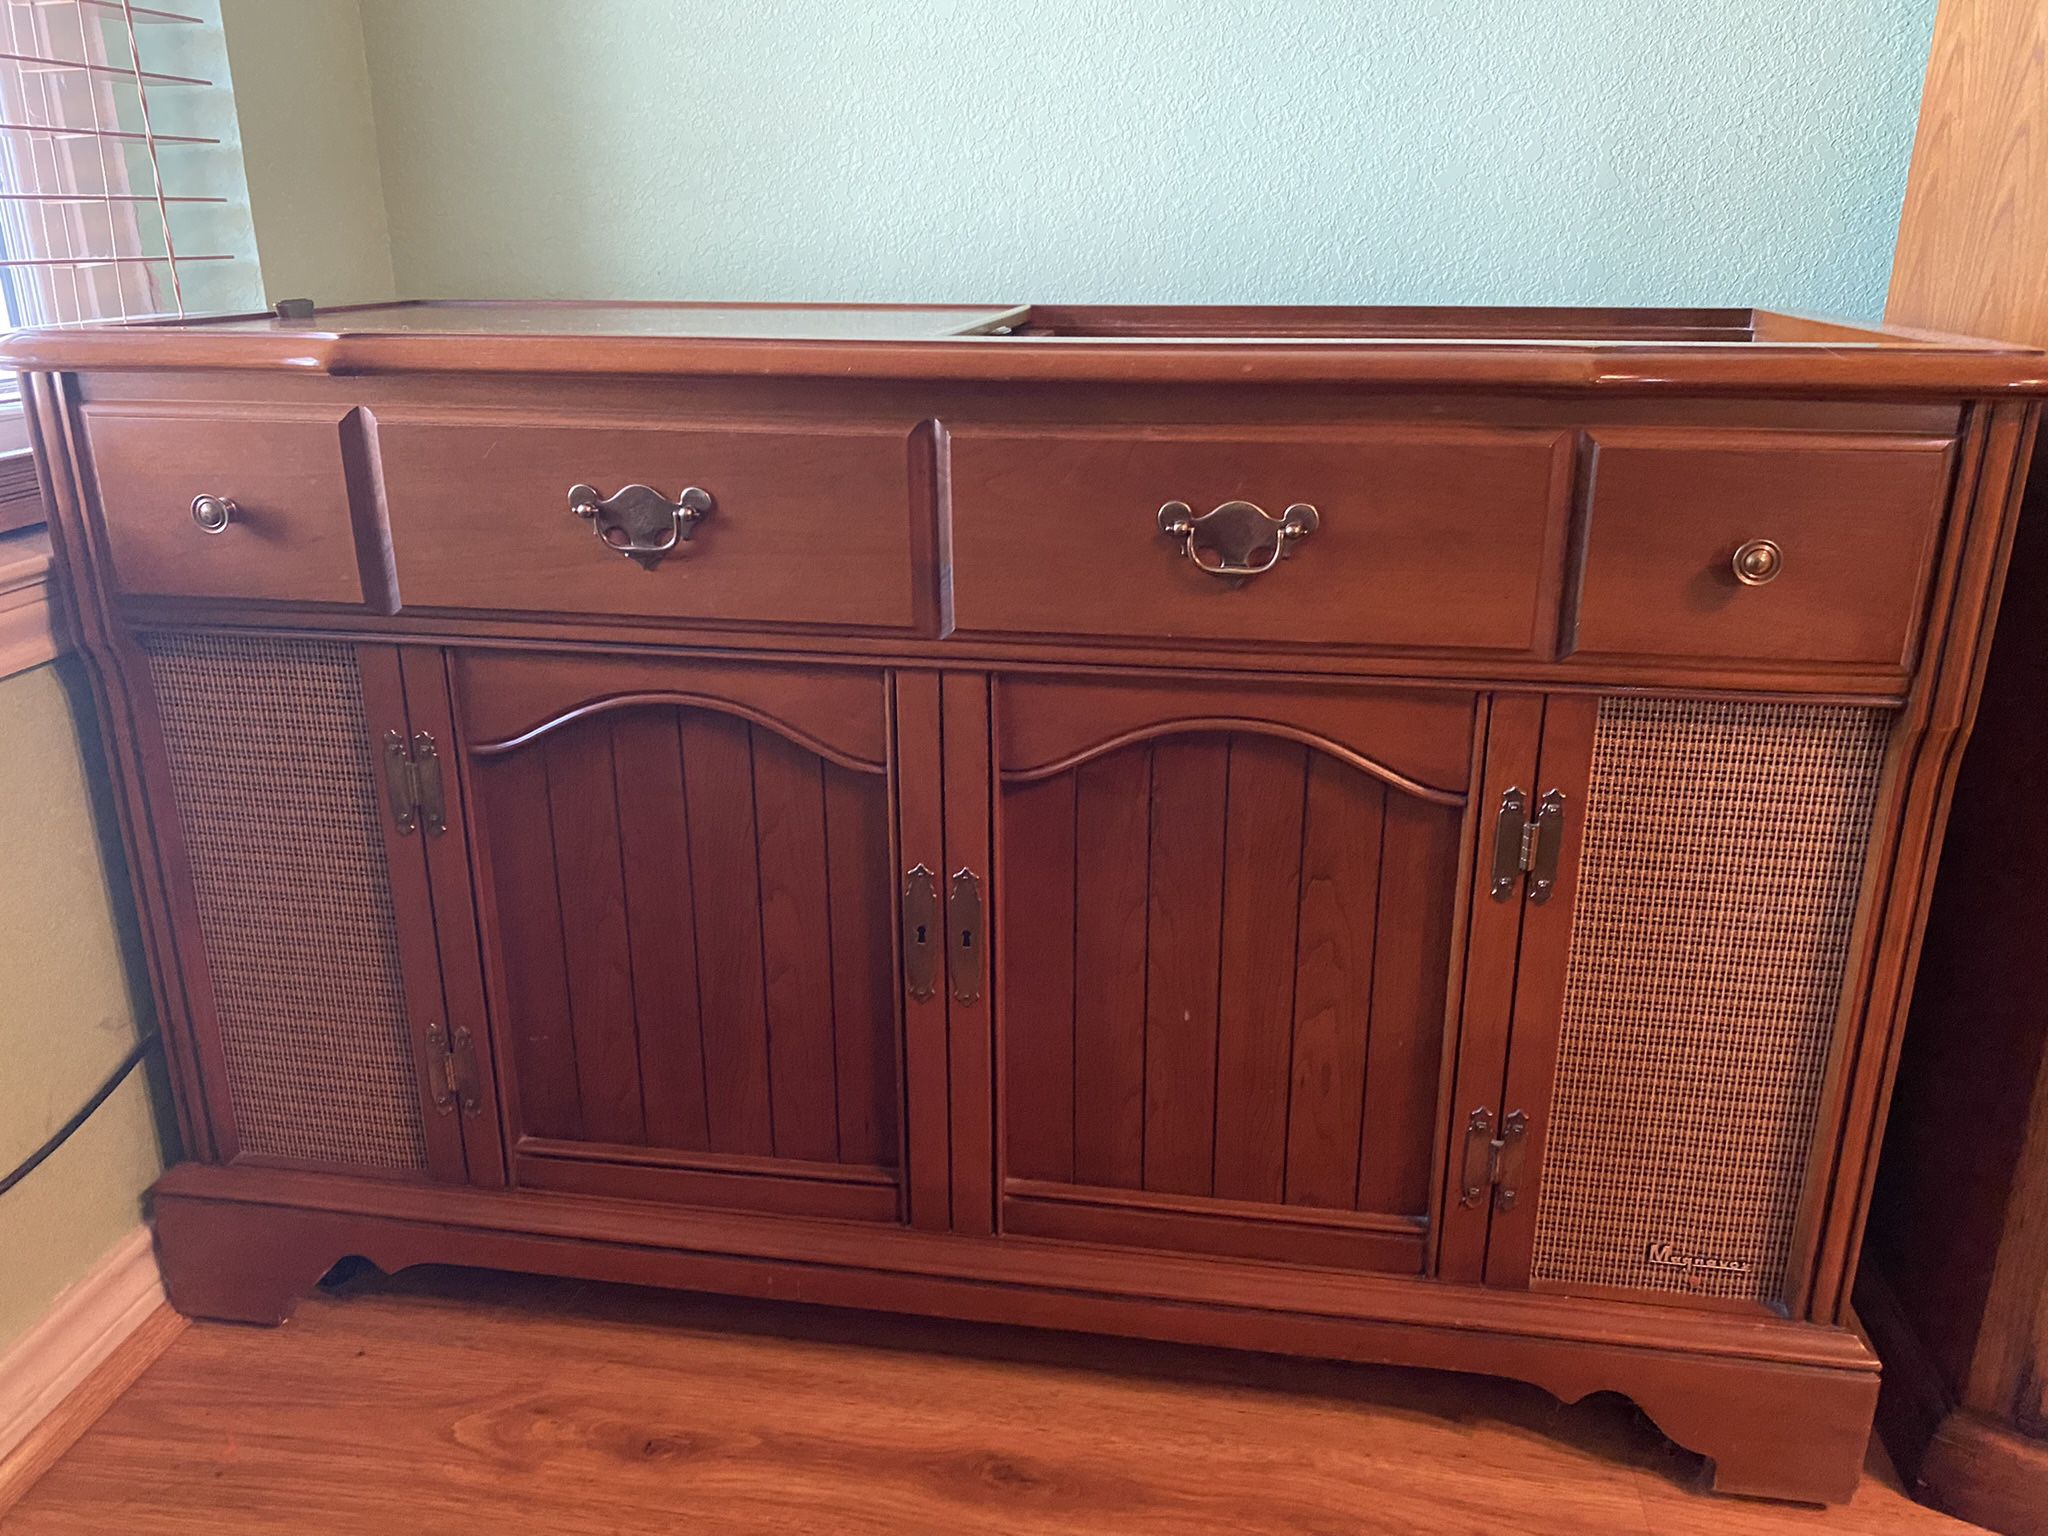 Magnavox Stereophonic High Fidelity Stereo System